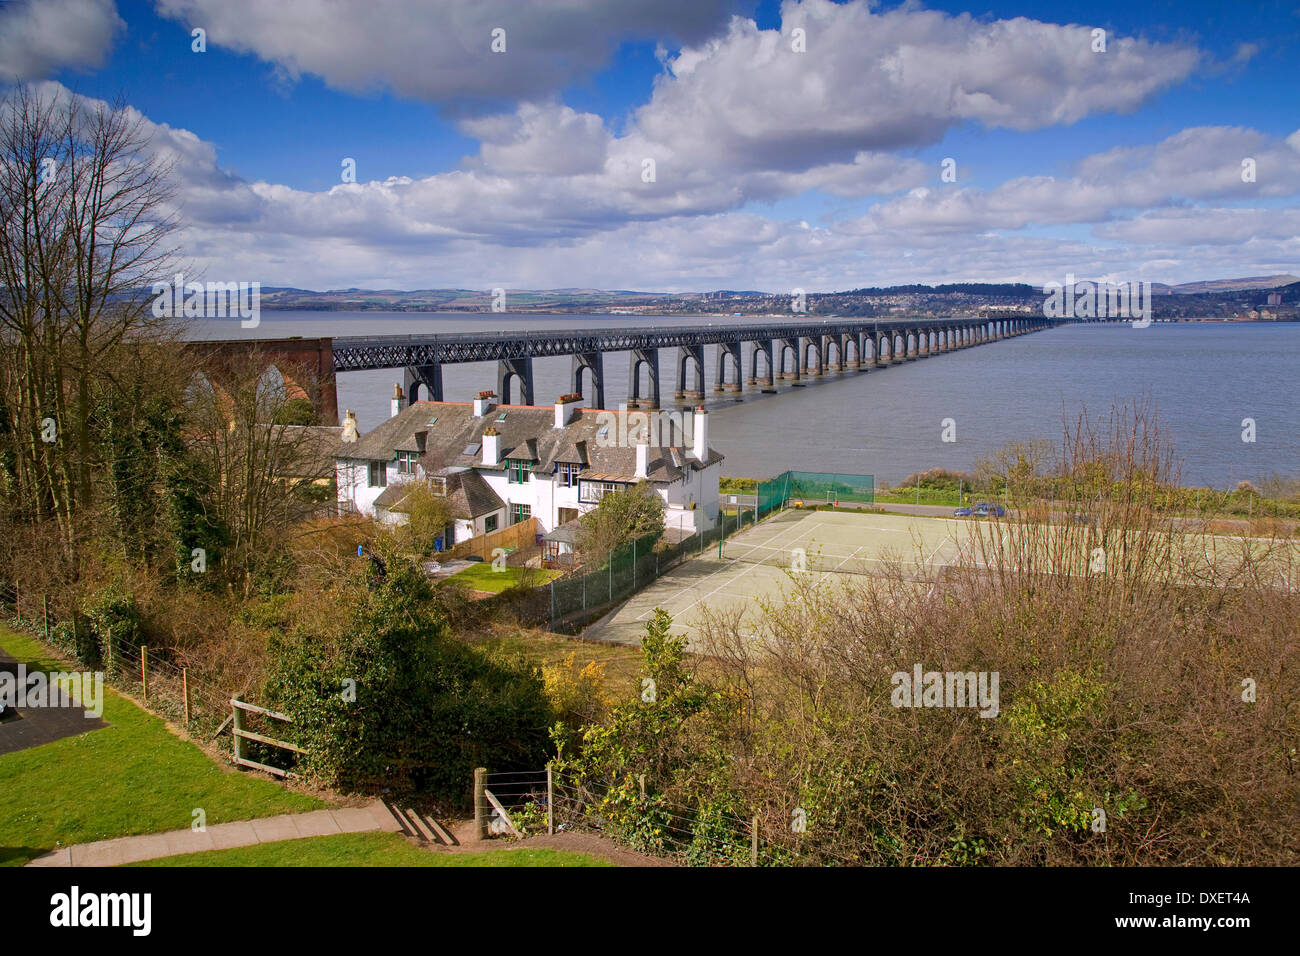 The Tail Rail Bridge as seen from Wormit, Tayside. Stock Photo